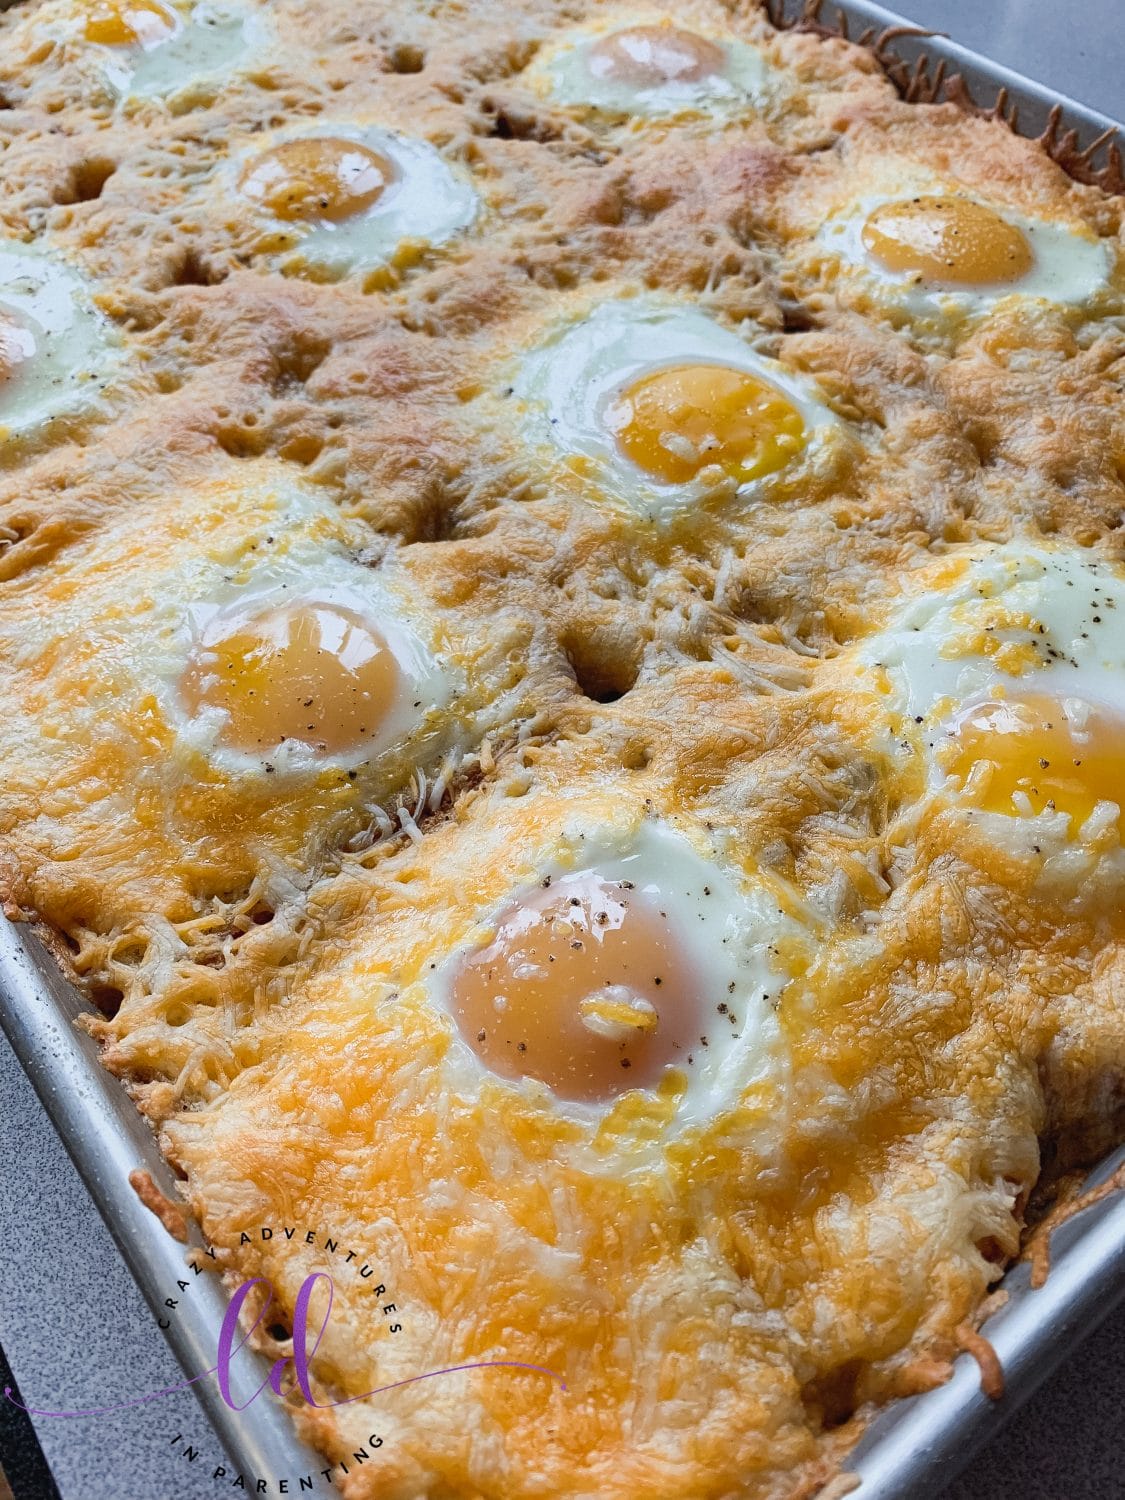 Fresh From the Oven Sheet Pan Cheesy Baked Egg Toast